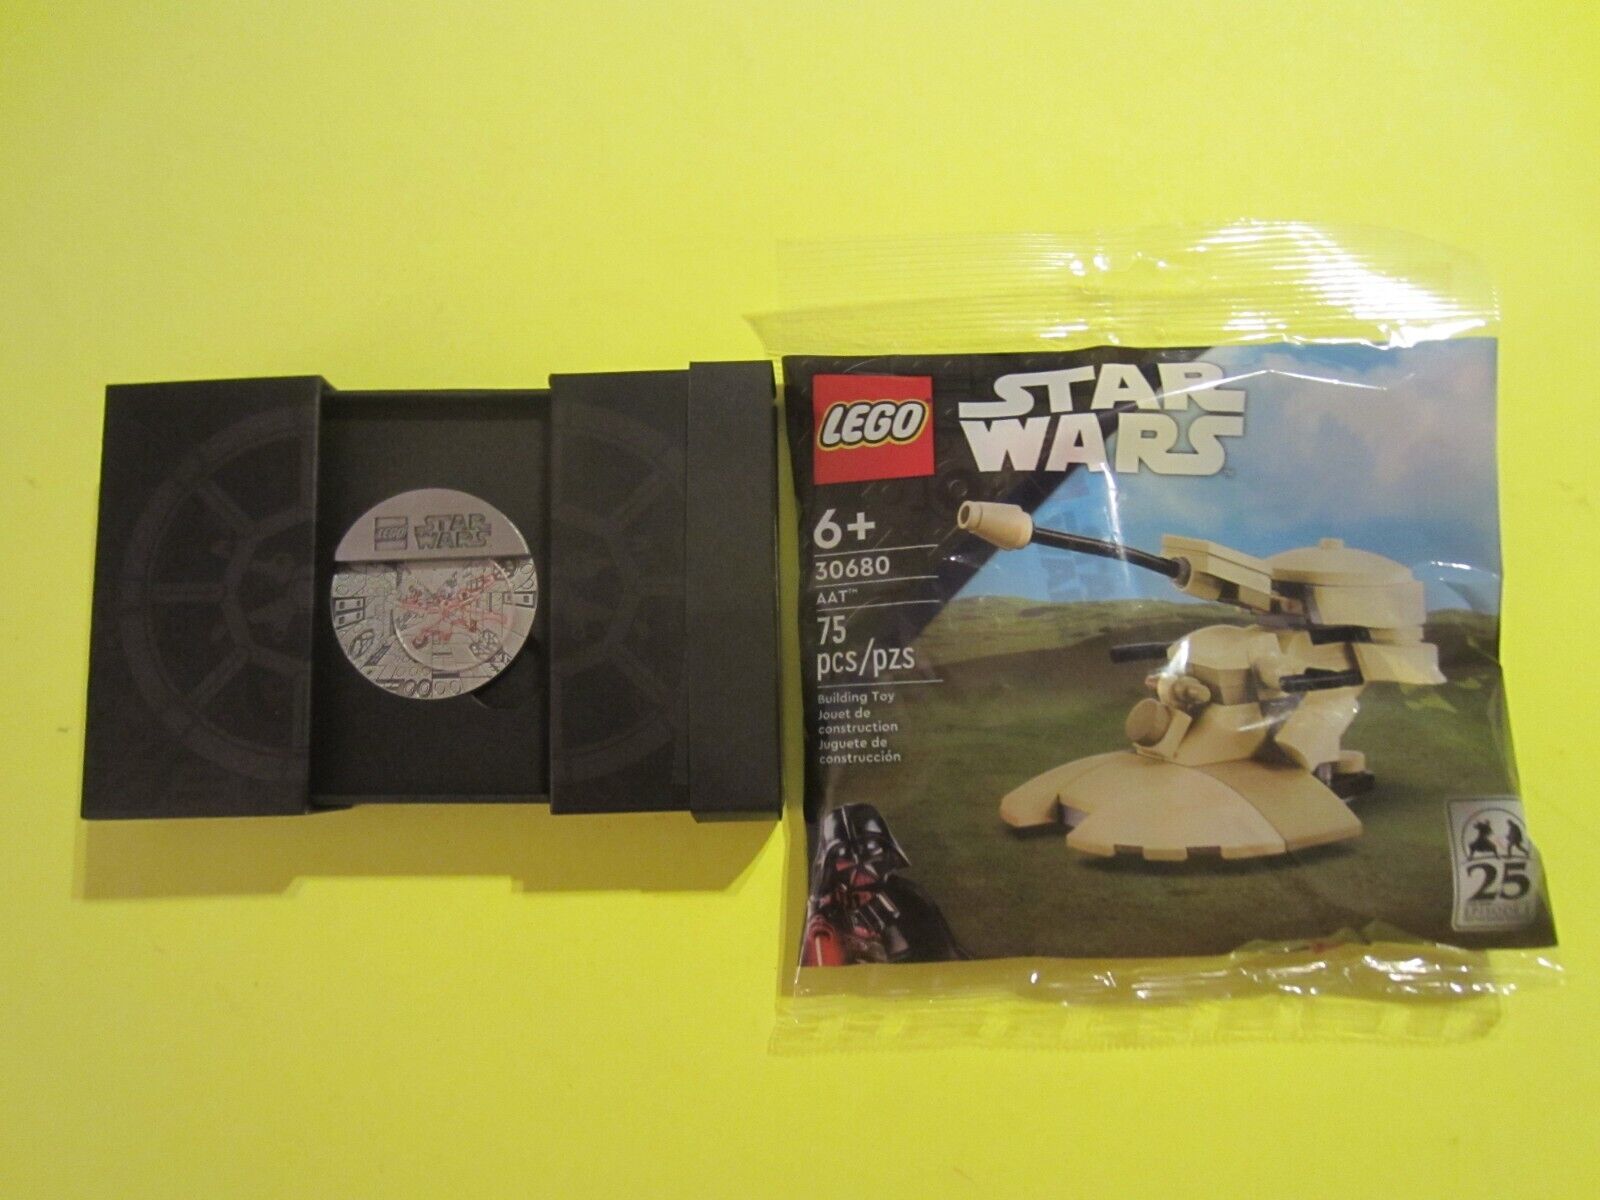 LEGO BATTLE OF YAVIN COIN 5008818 + AAT 25TH ANNIVERSARY POLYBAG 30680 BOTH NEW